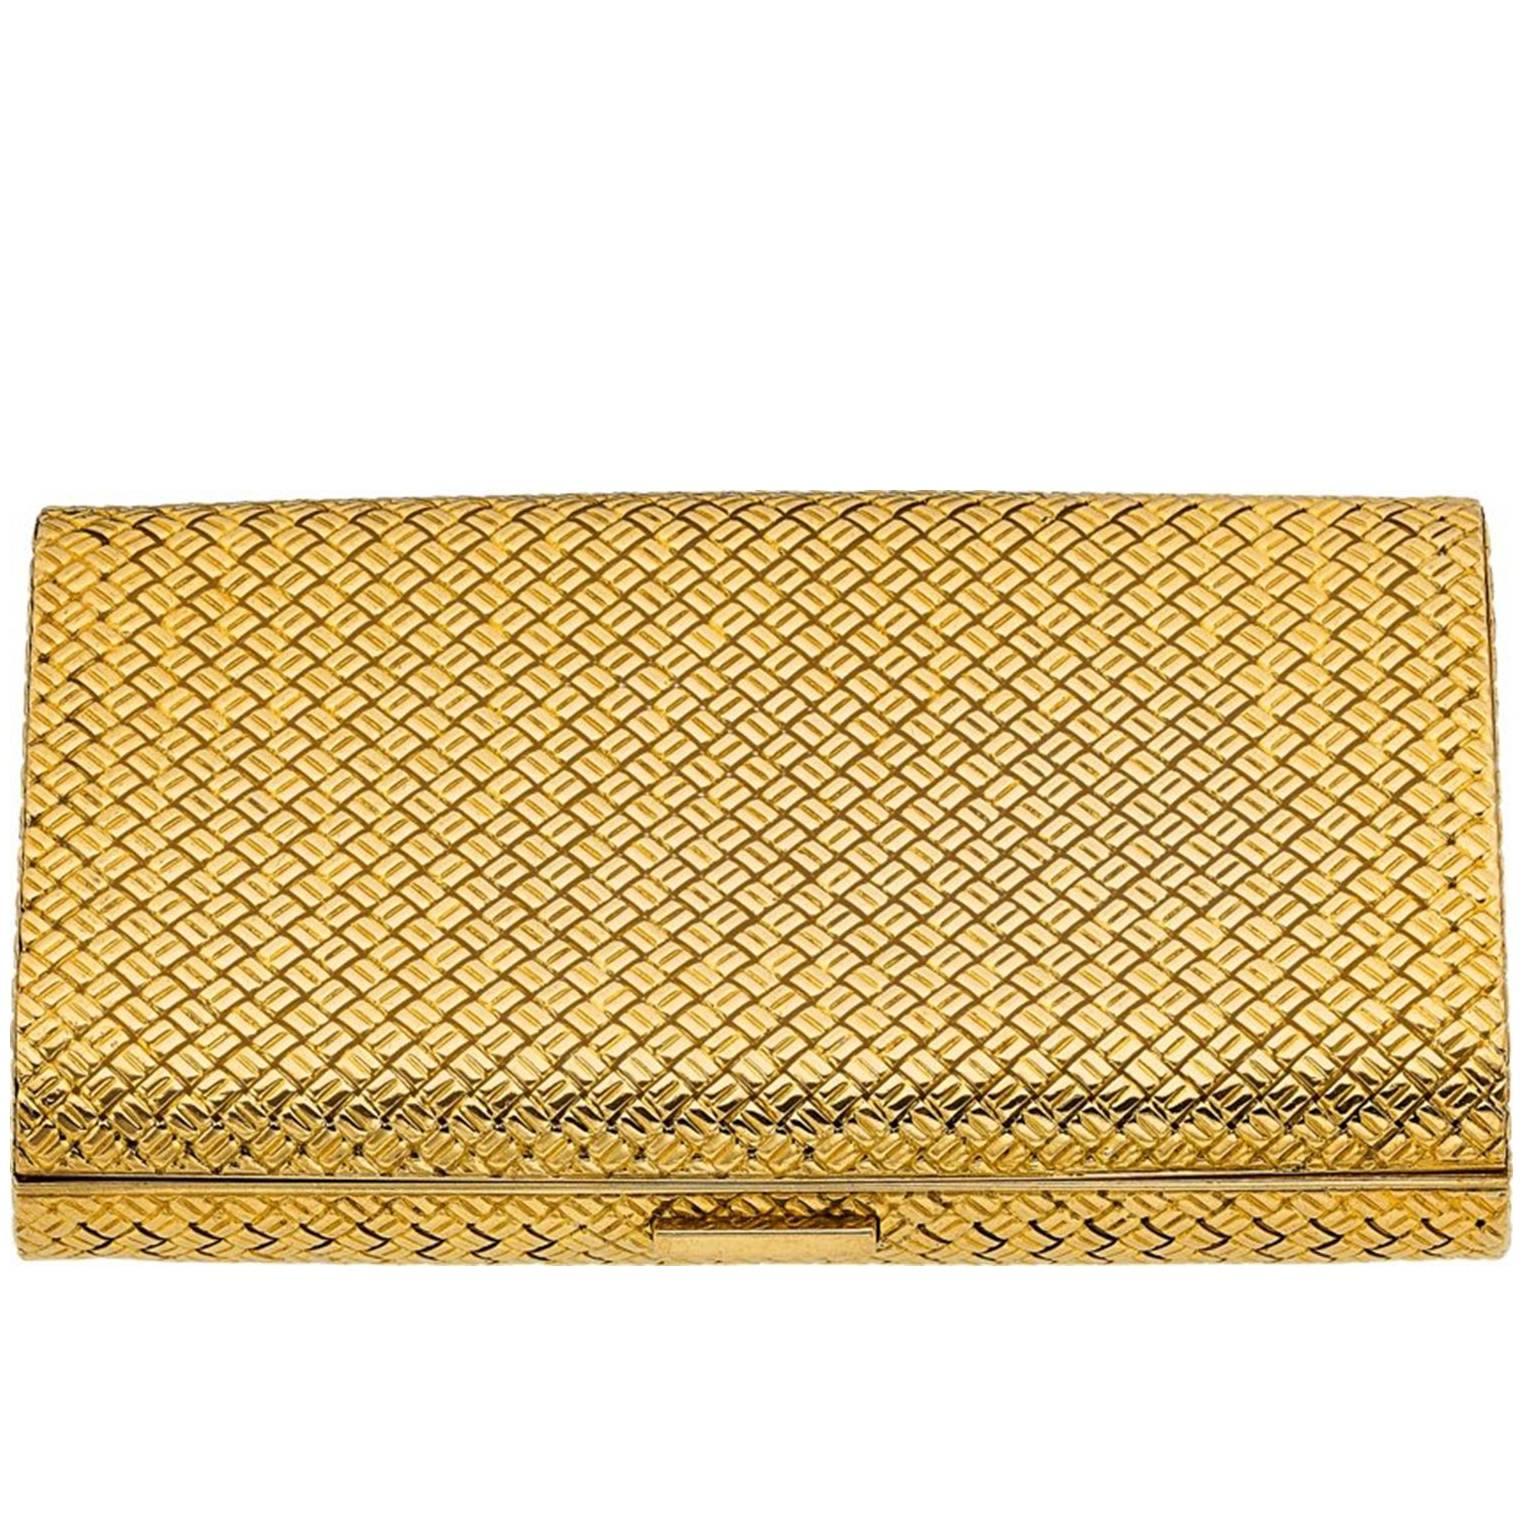 An impeccably crafted Necessaire compact case by Van Cleef & Arpels.  It has a special basket weave design in 18K yellow gold.  The case is versatile and easy to use to keep many different things inside!